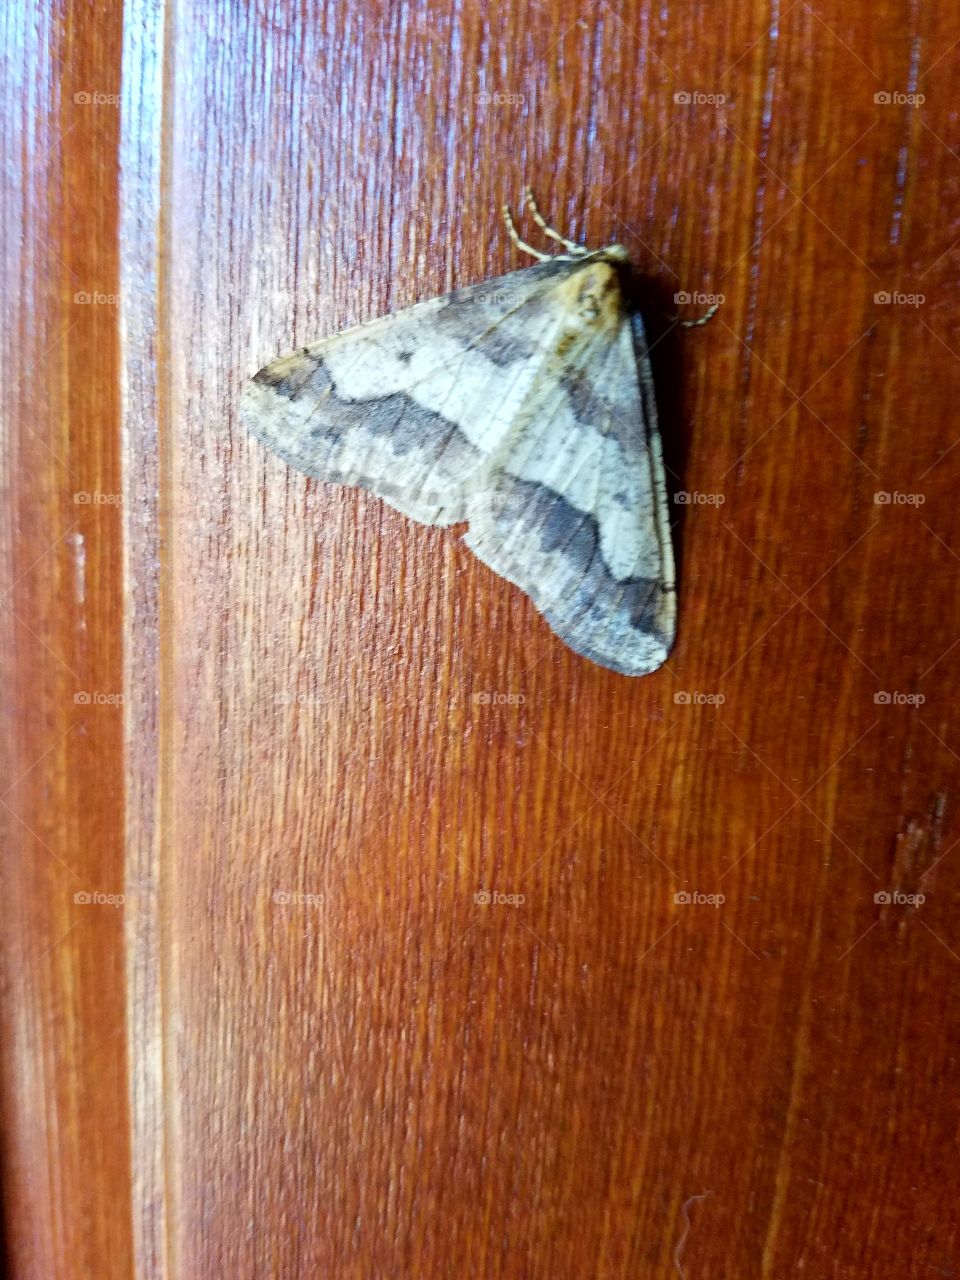 A late summer visitor on my front door.